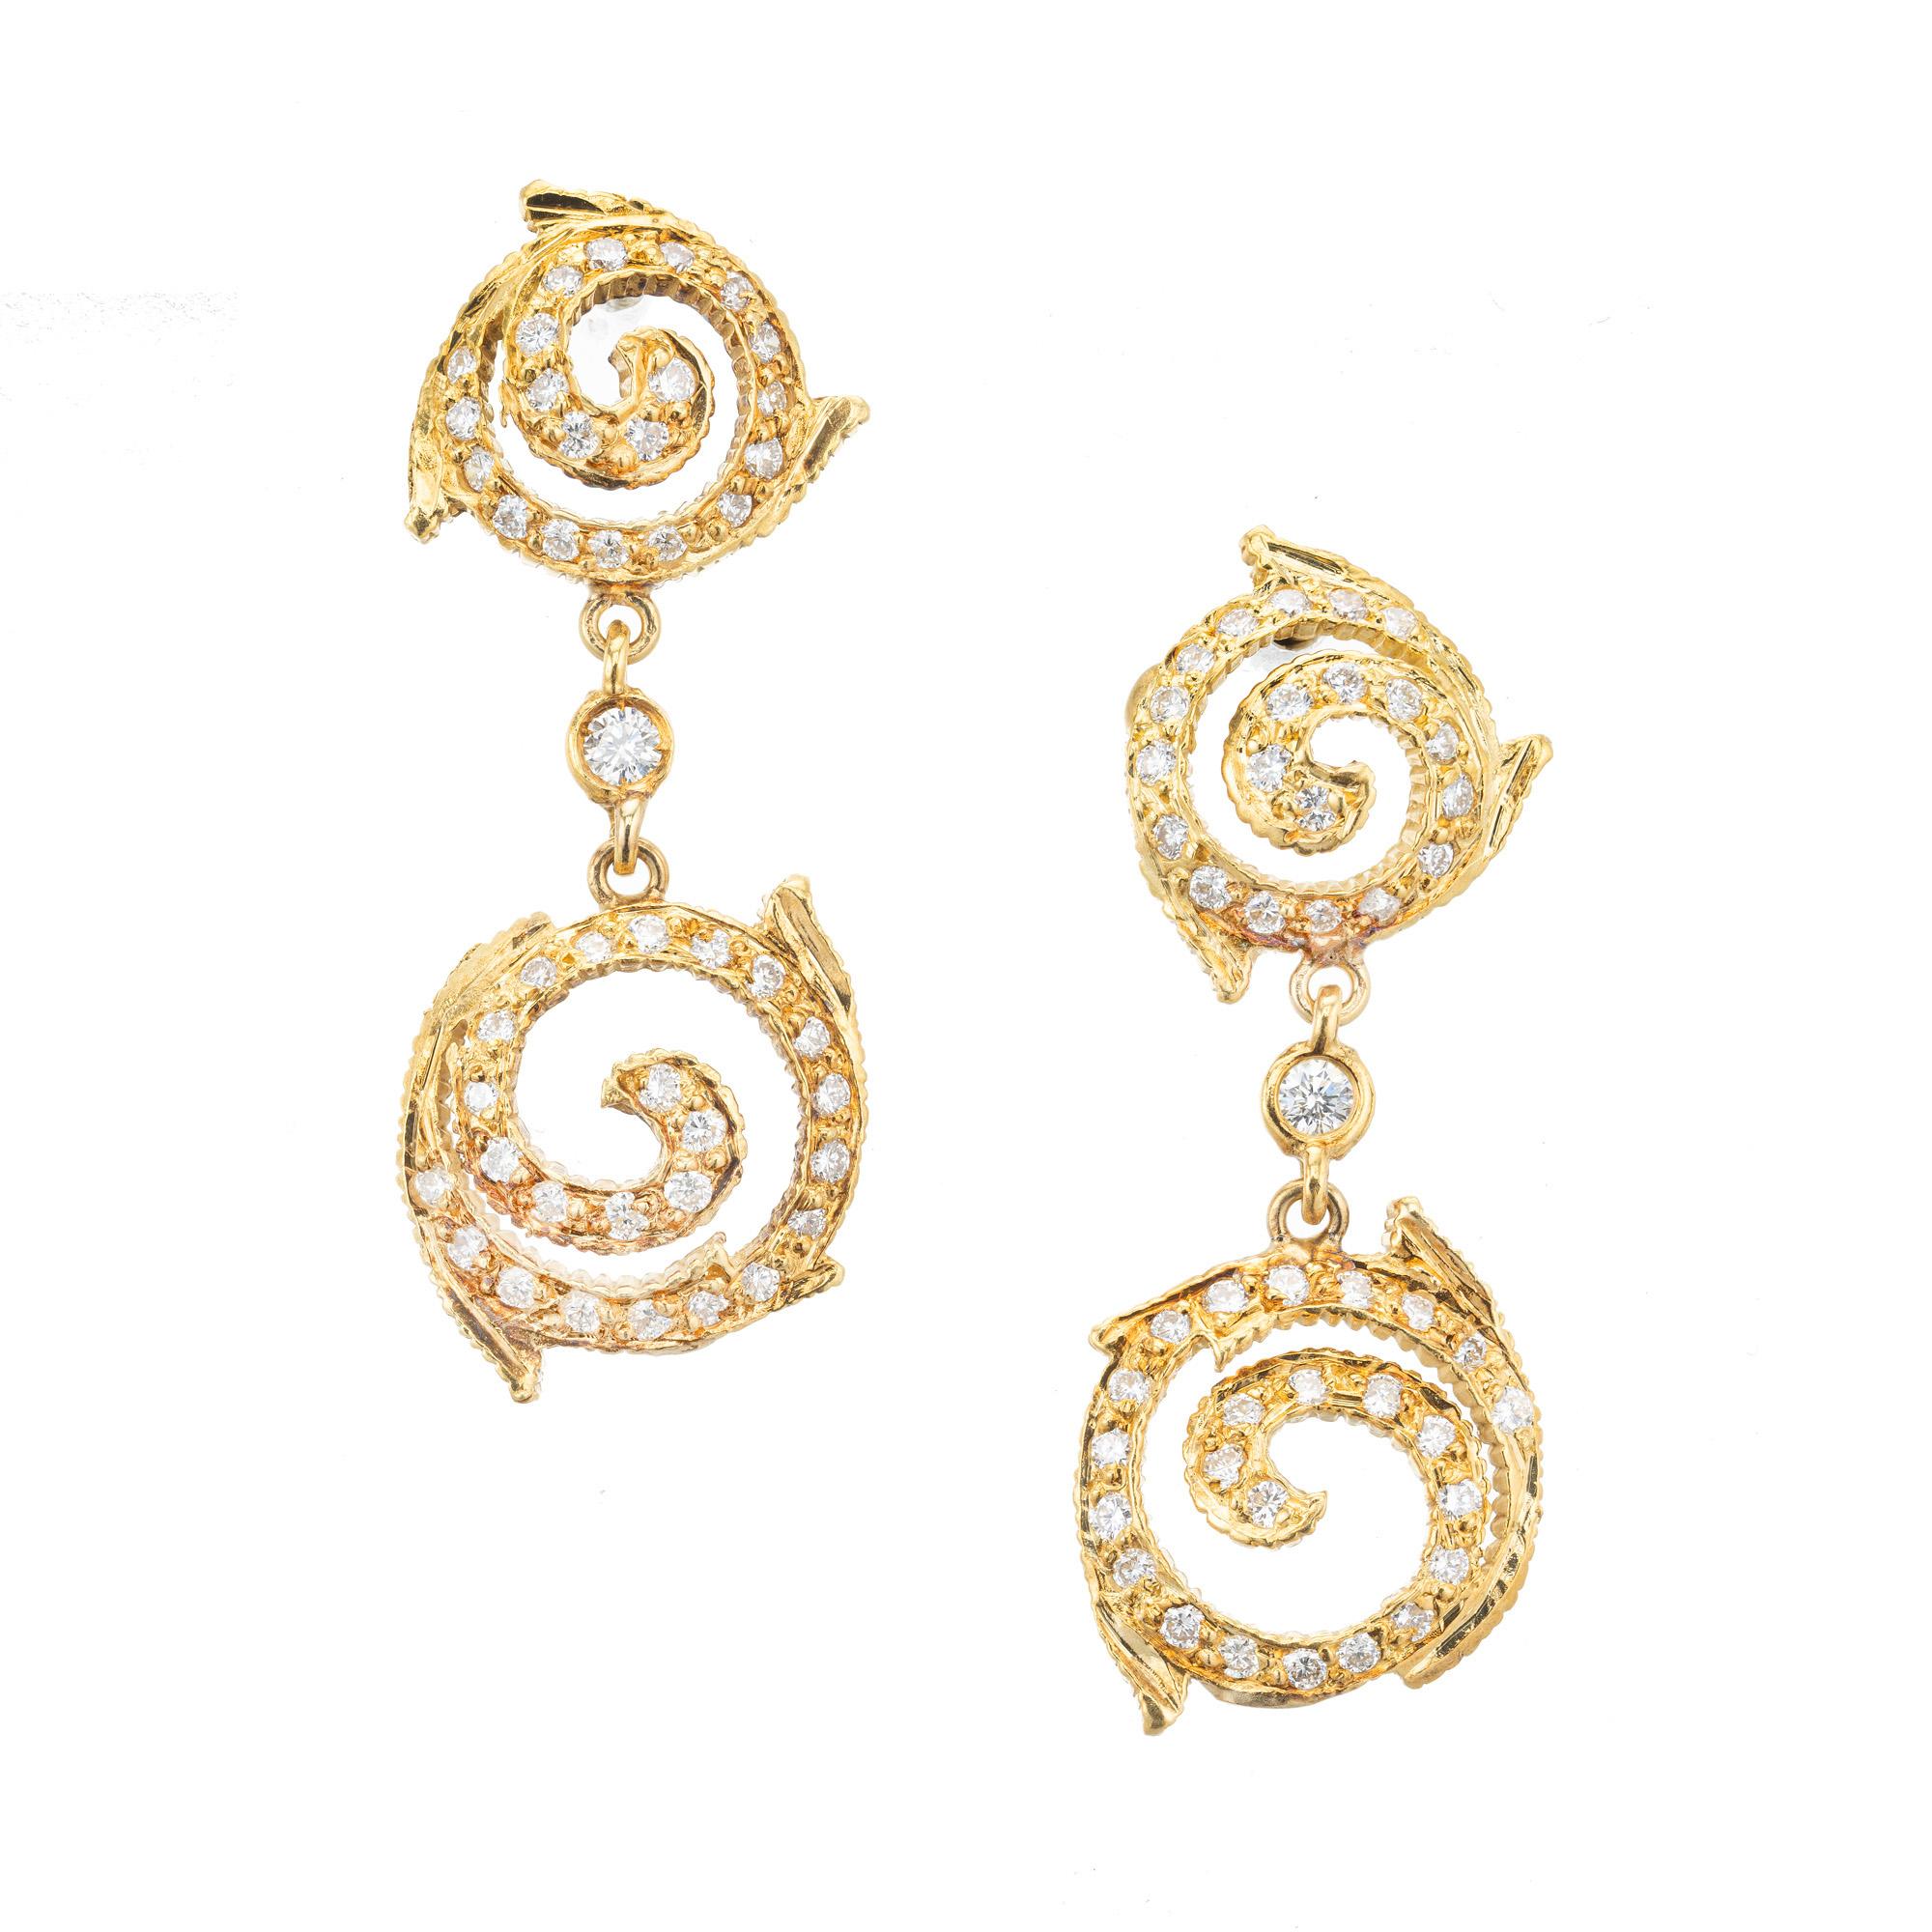 Created by Doris Panos these 18k yellow gold dangle earrings are adorned with 90 full cut diamonds approximately totaling .90cts. and graded G near colorless with a clarity of VS2-Si1. The two unique diamond swirl sections are connected by a round